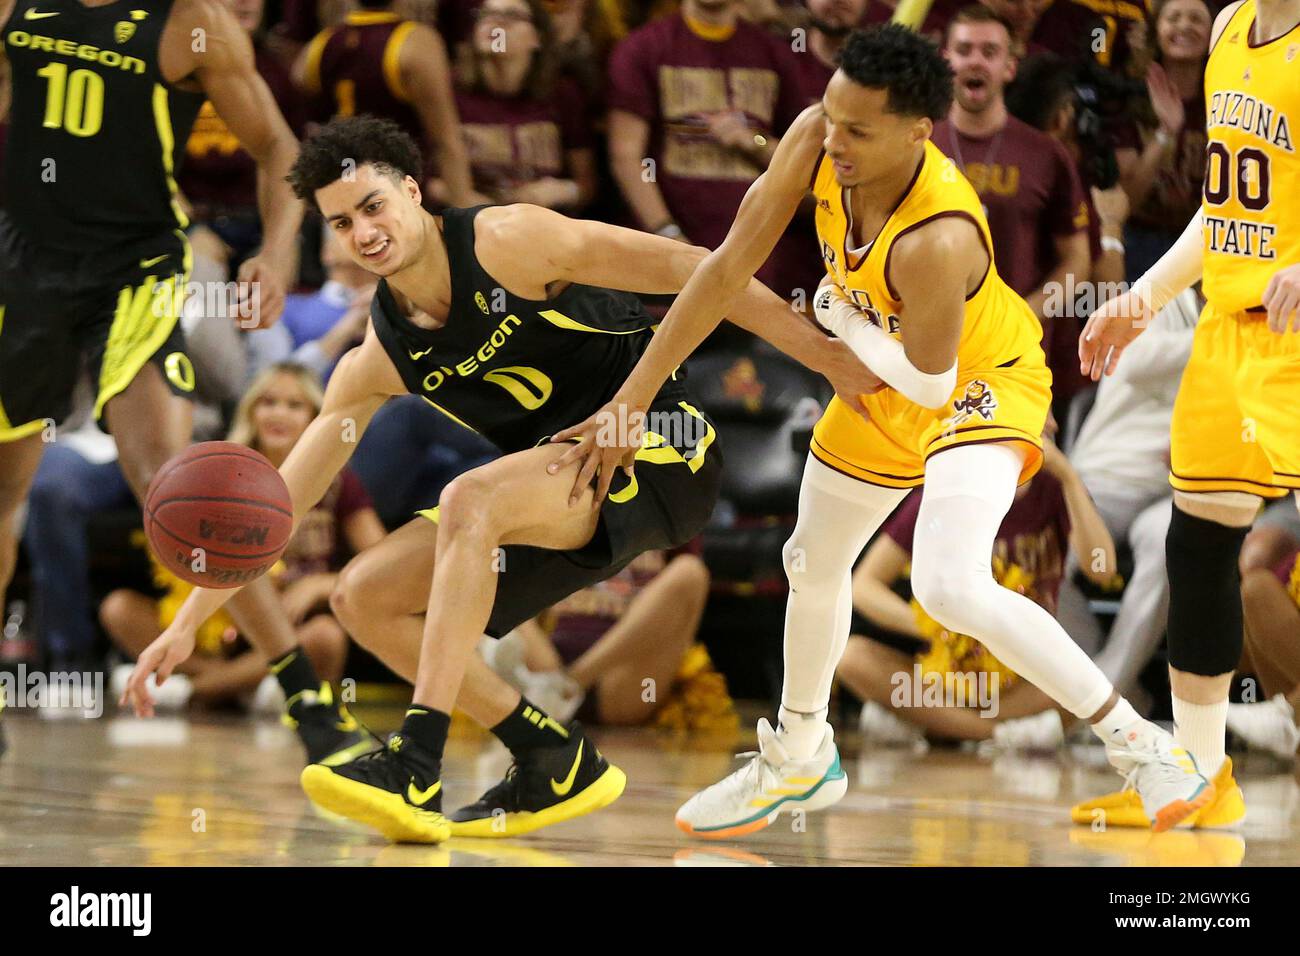 Arizona State's Alonzo Verge (11) shoots over Washington's Isaiah Stewart  (33) during the second half of an NCAA college basketball game Thursday,  March 5, 2020, in Tempe, Ariz. (AP Photo/Darryl Webb Stock Photo - Alamy